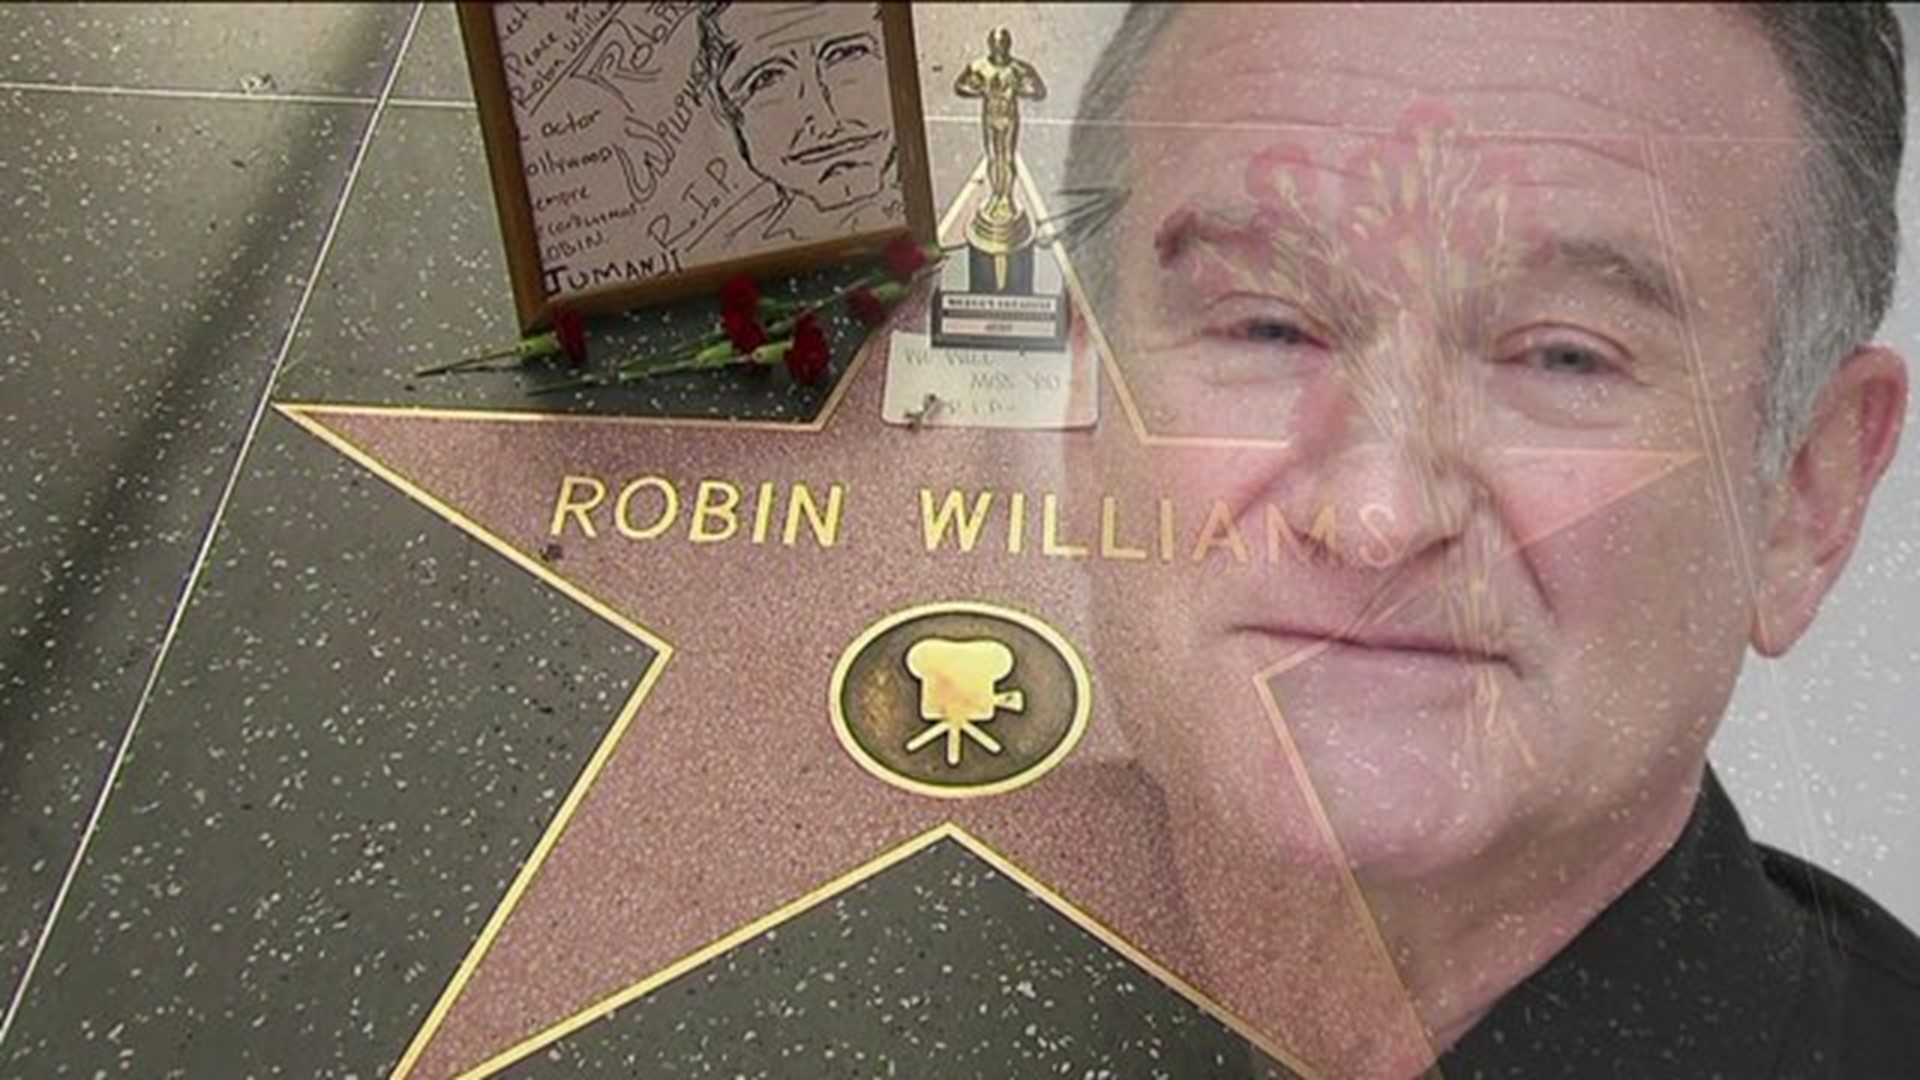 Robin Williams` Death Brings To Light Need For Mental Healthcare